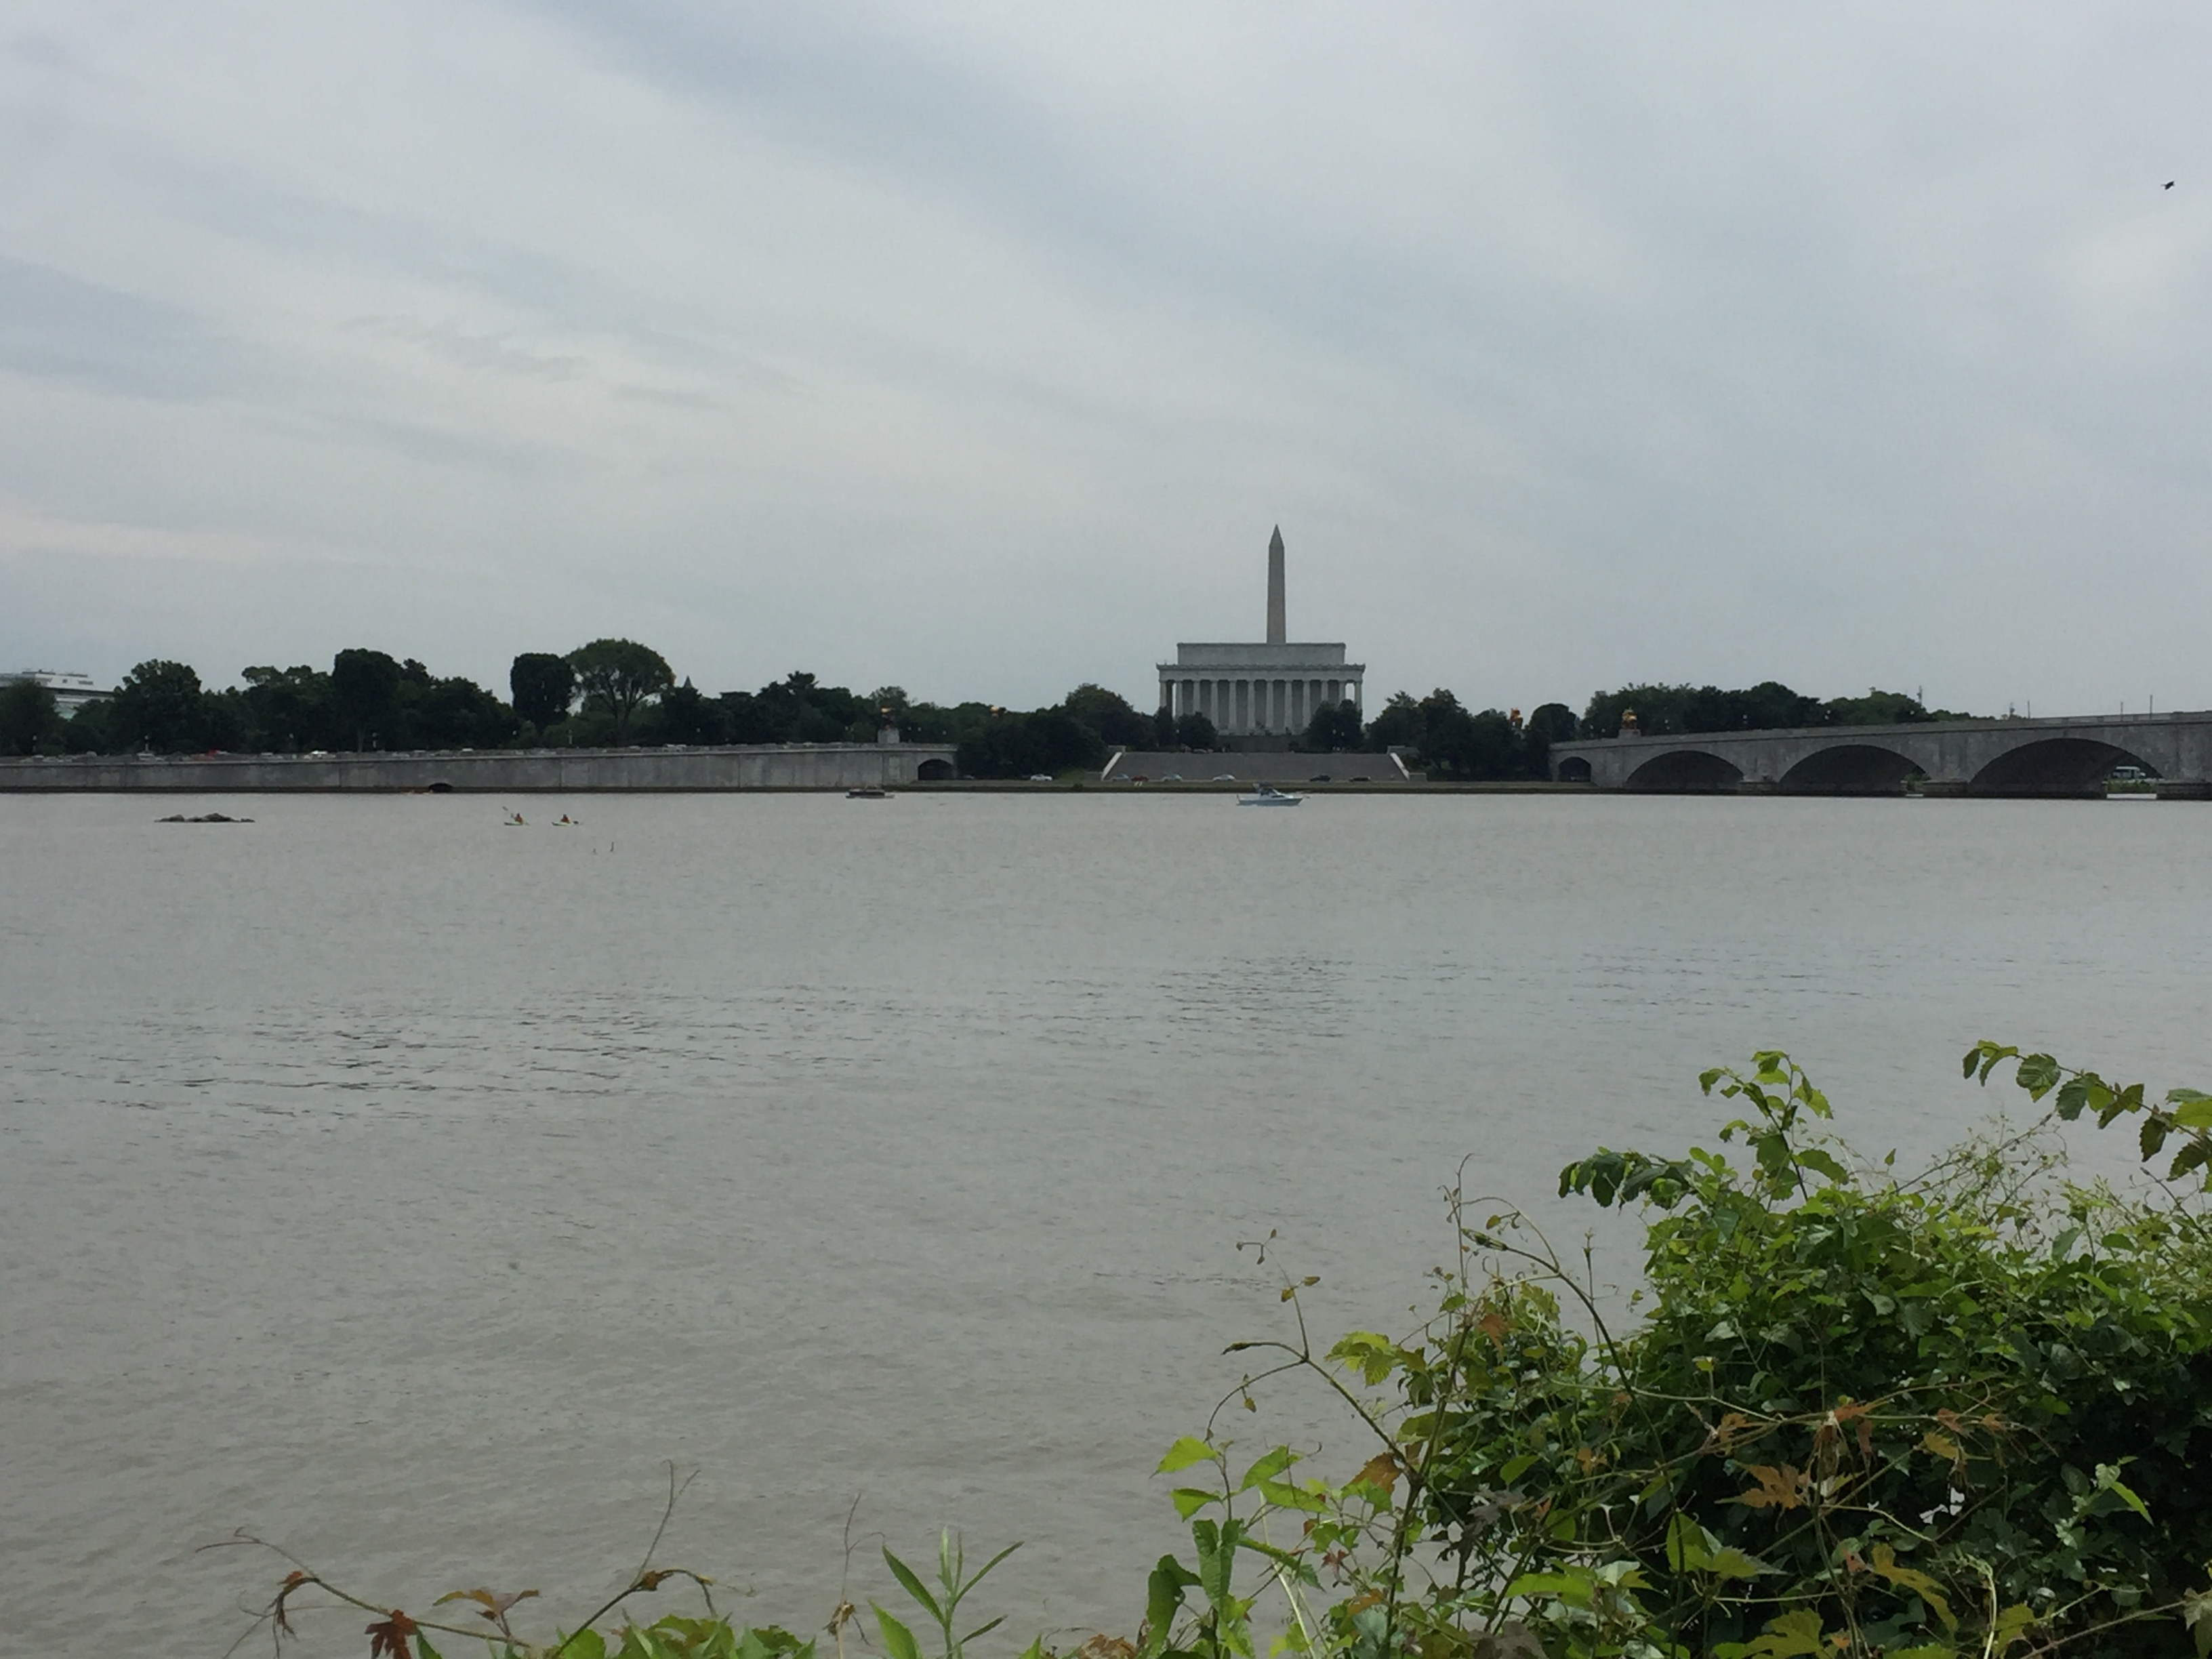 Looking across the Potomac, you can see the Washington Monument and Lincoln Memorial line up perfectly.